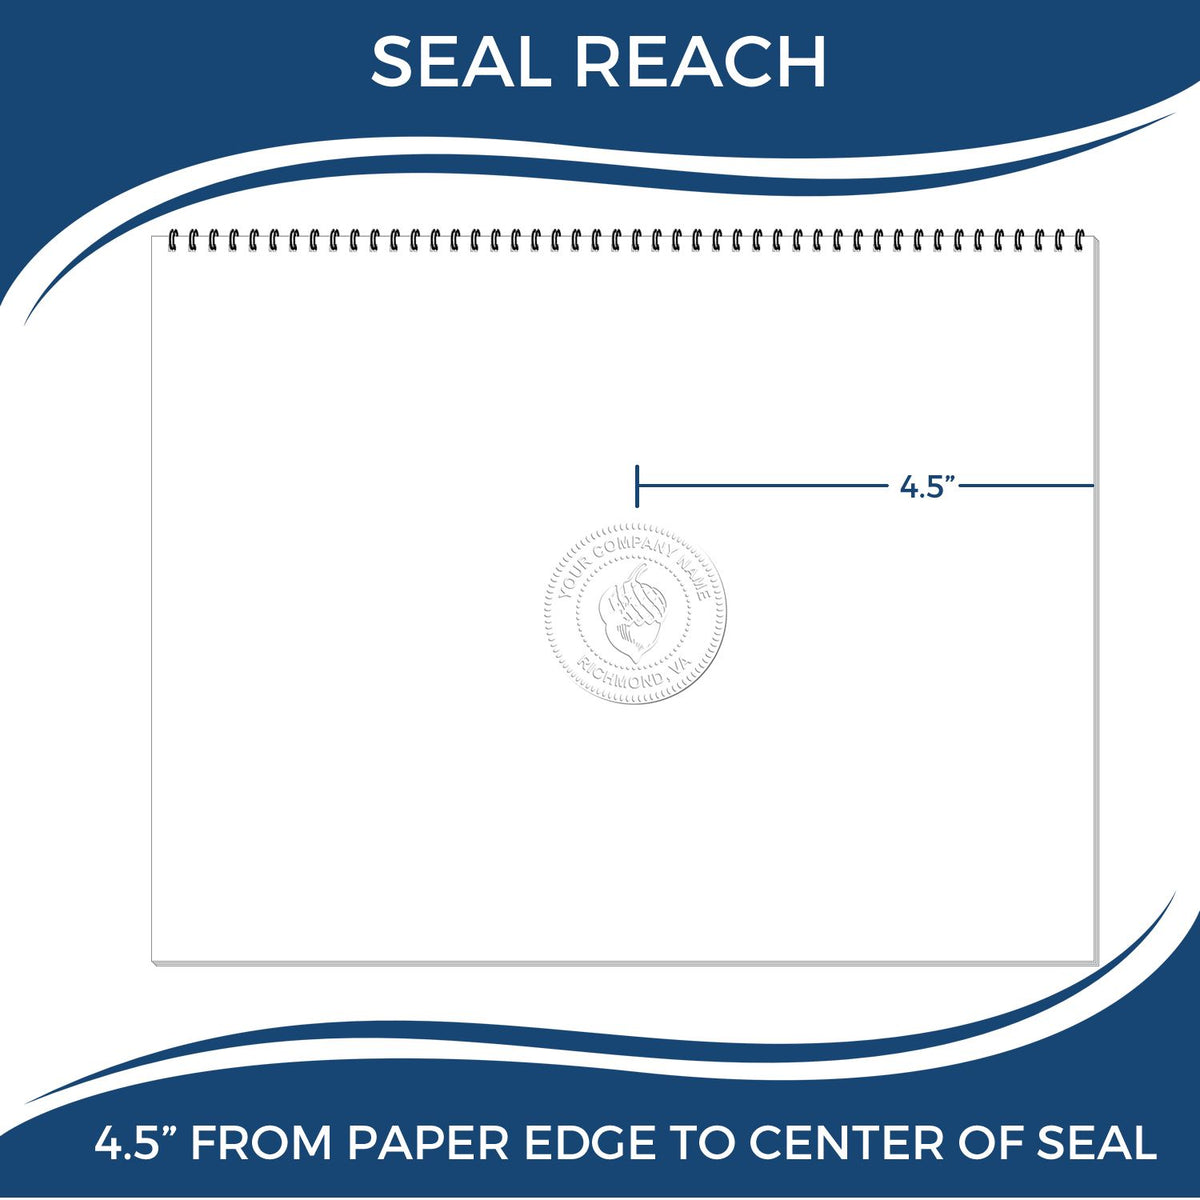 An infographic showing the seal reach which is represented by a ruler and a miniature seal image of the State of South Carolina Extended Long Reach Geologist Seal